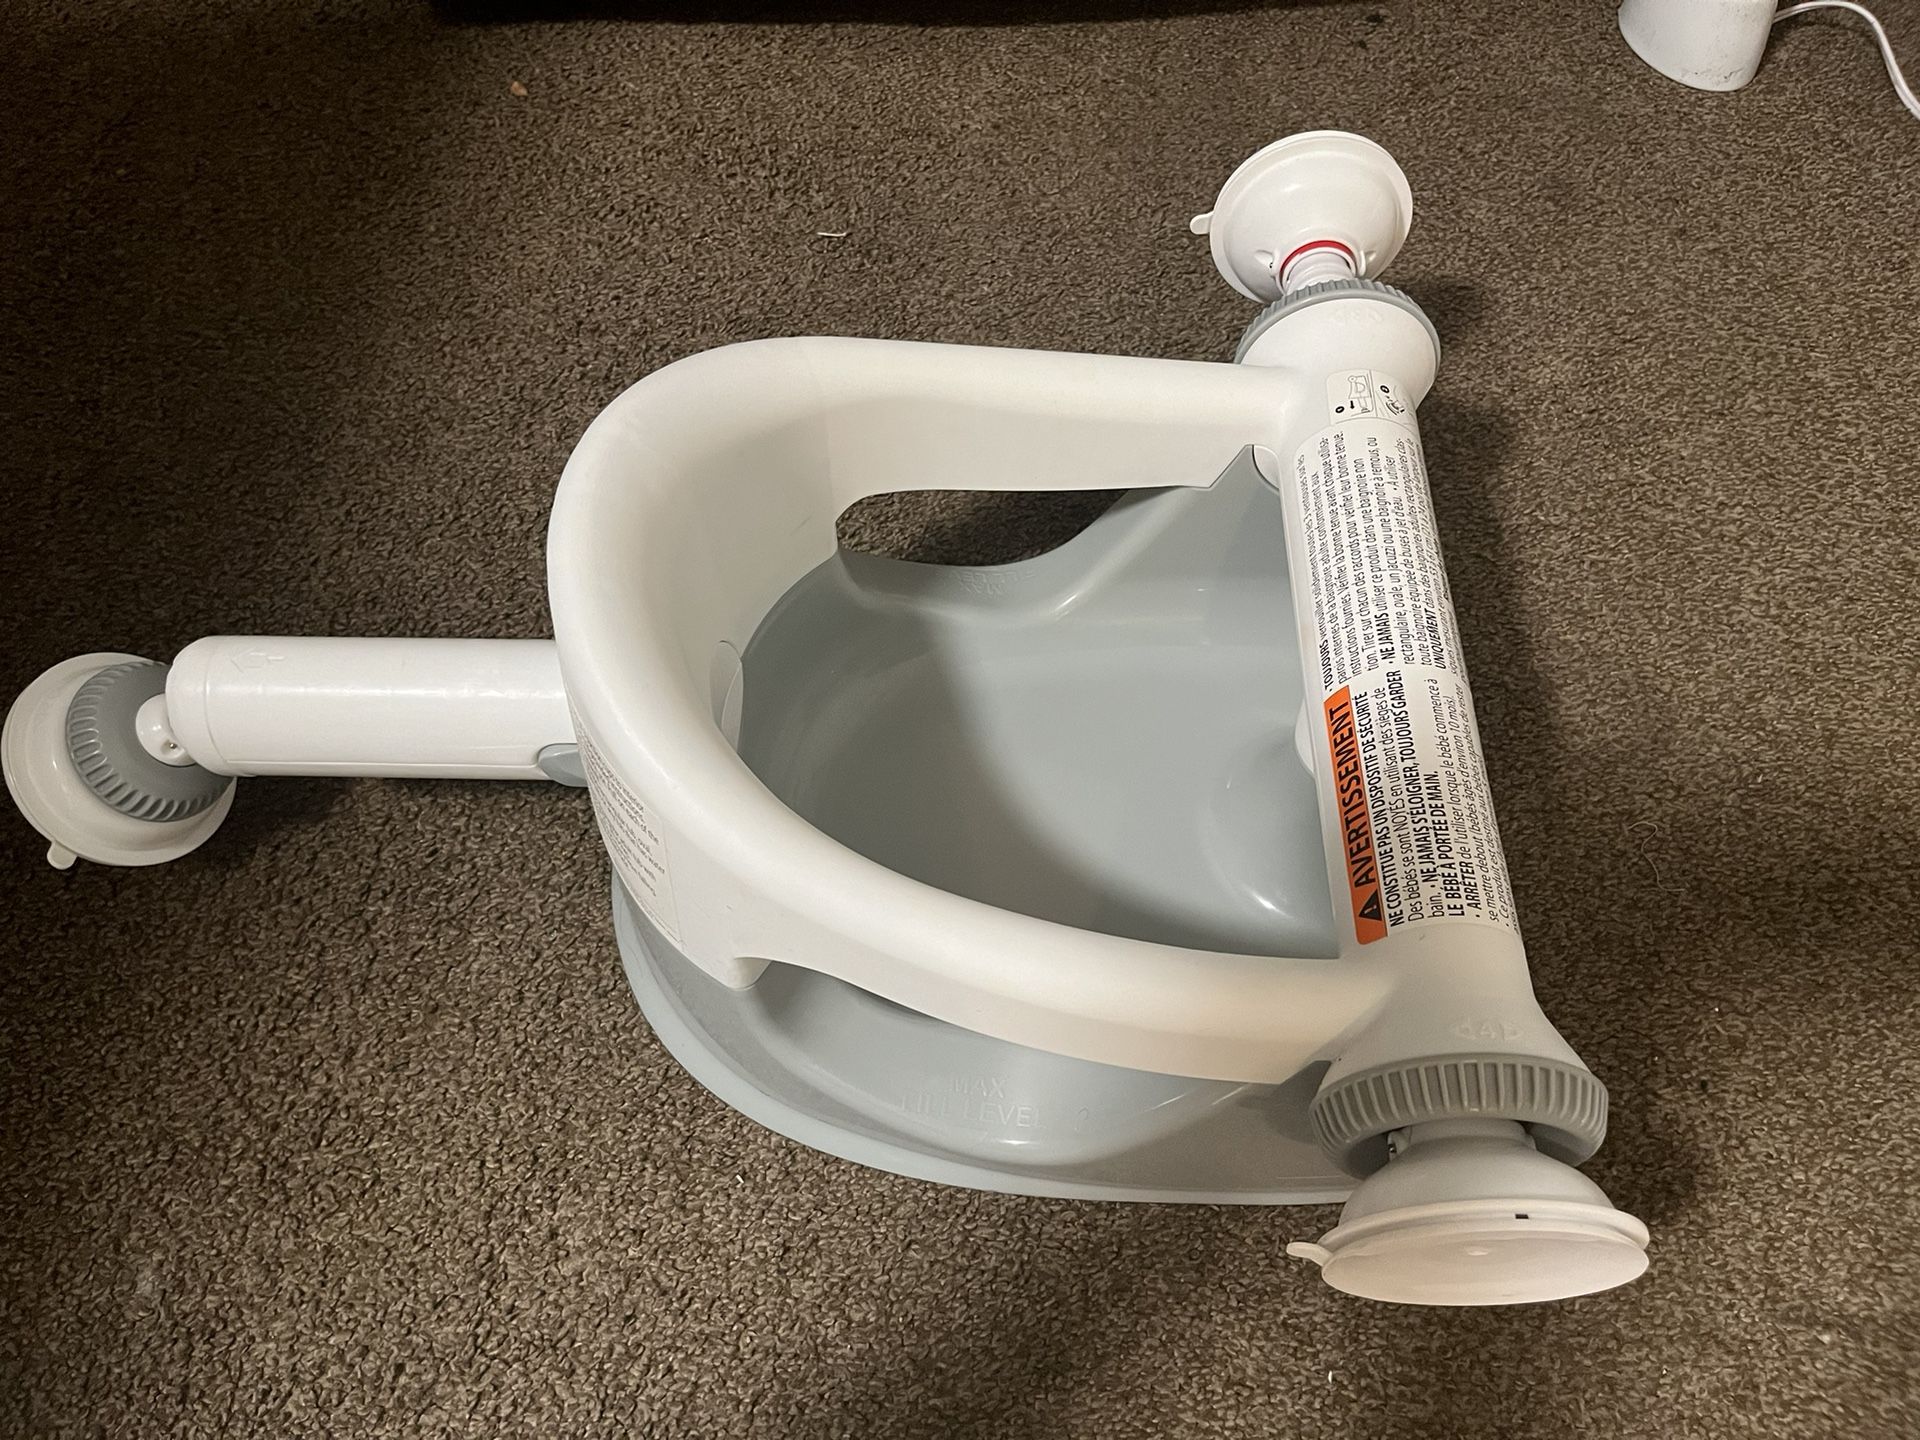 Bath Time Suction Cup Seat For The Tub